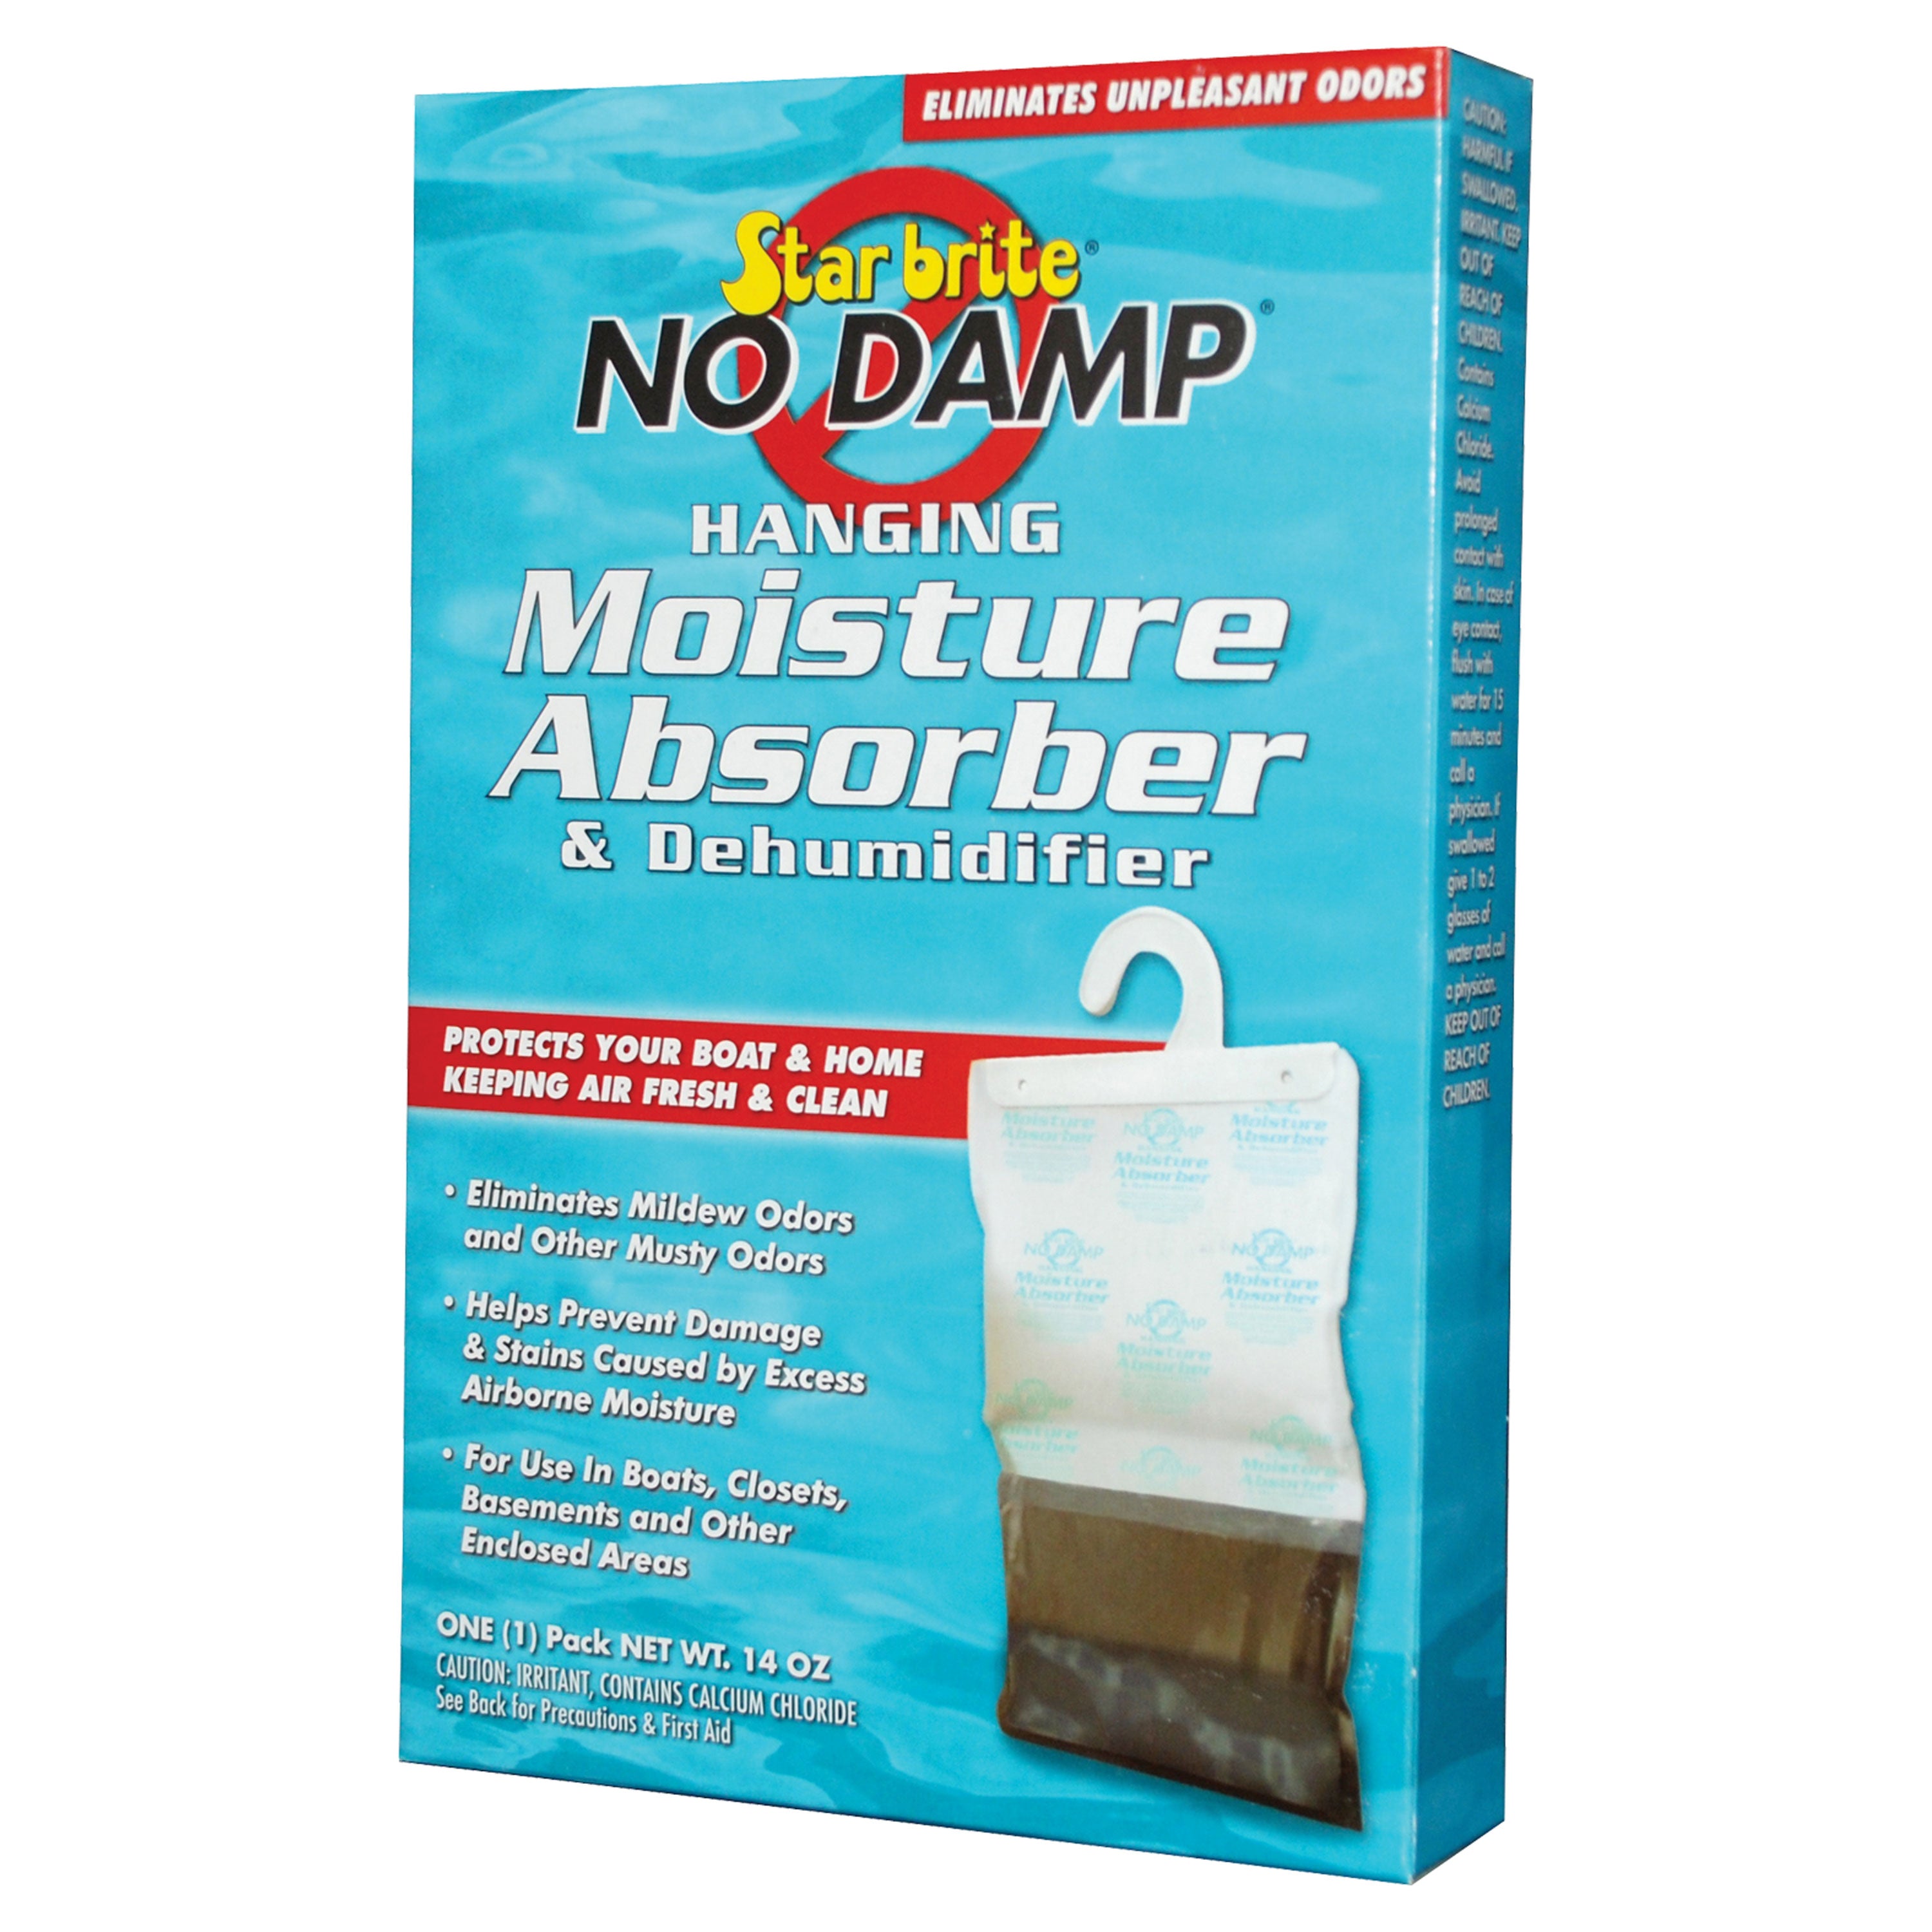 Star brite 085470 No Damp Hanging Moisture Absorber and Dehumidifier - 14 oz